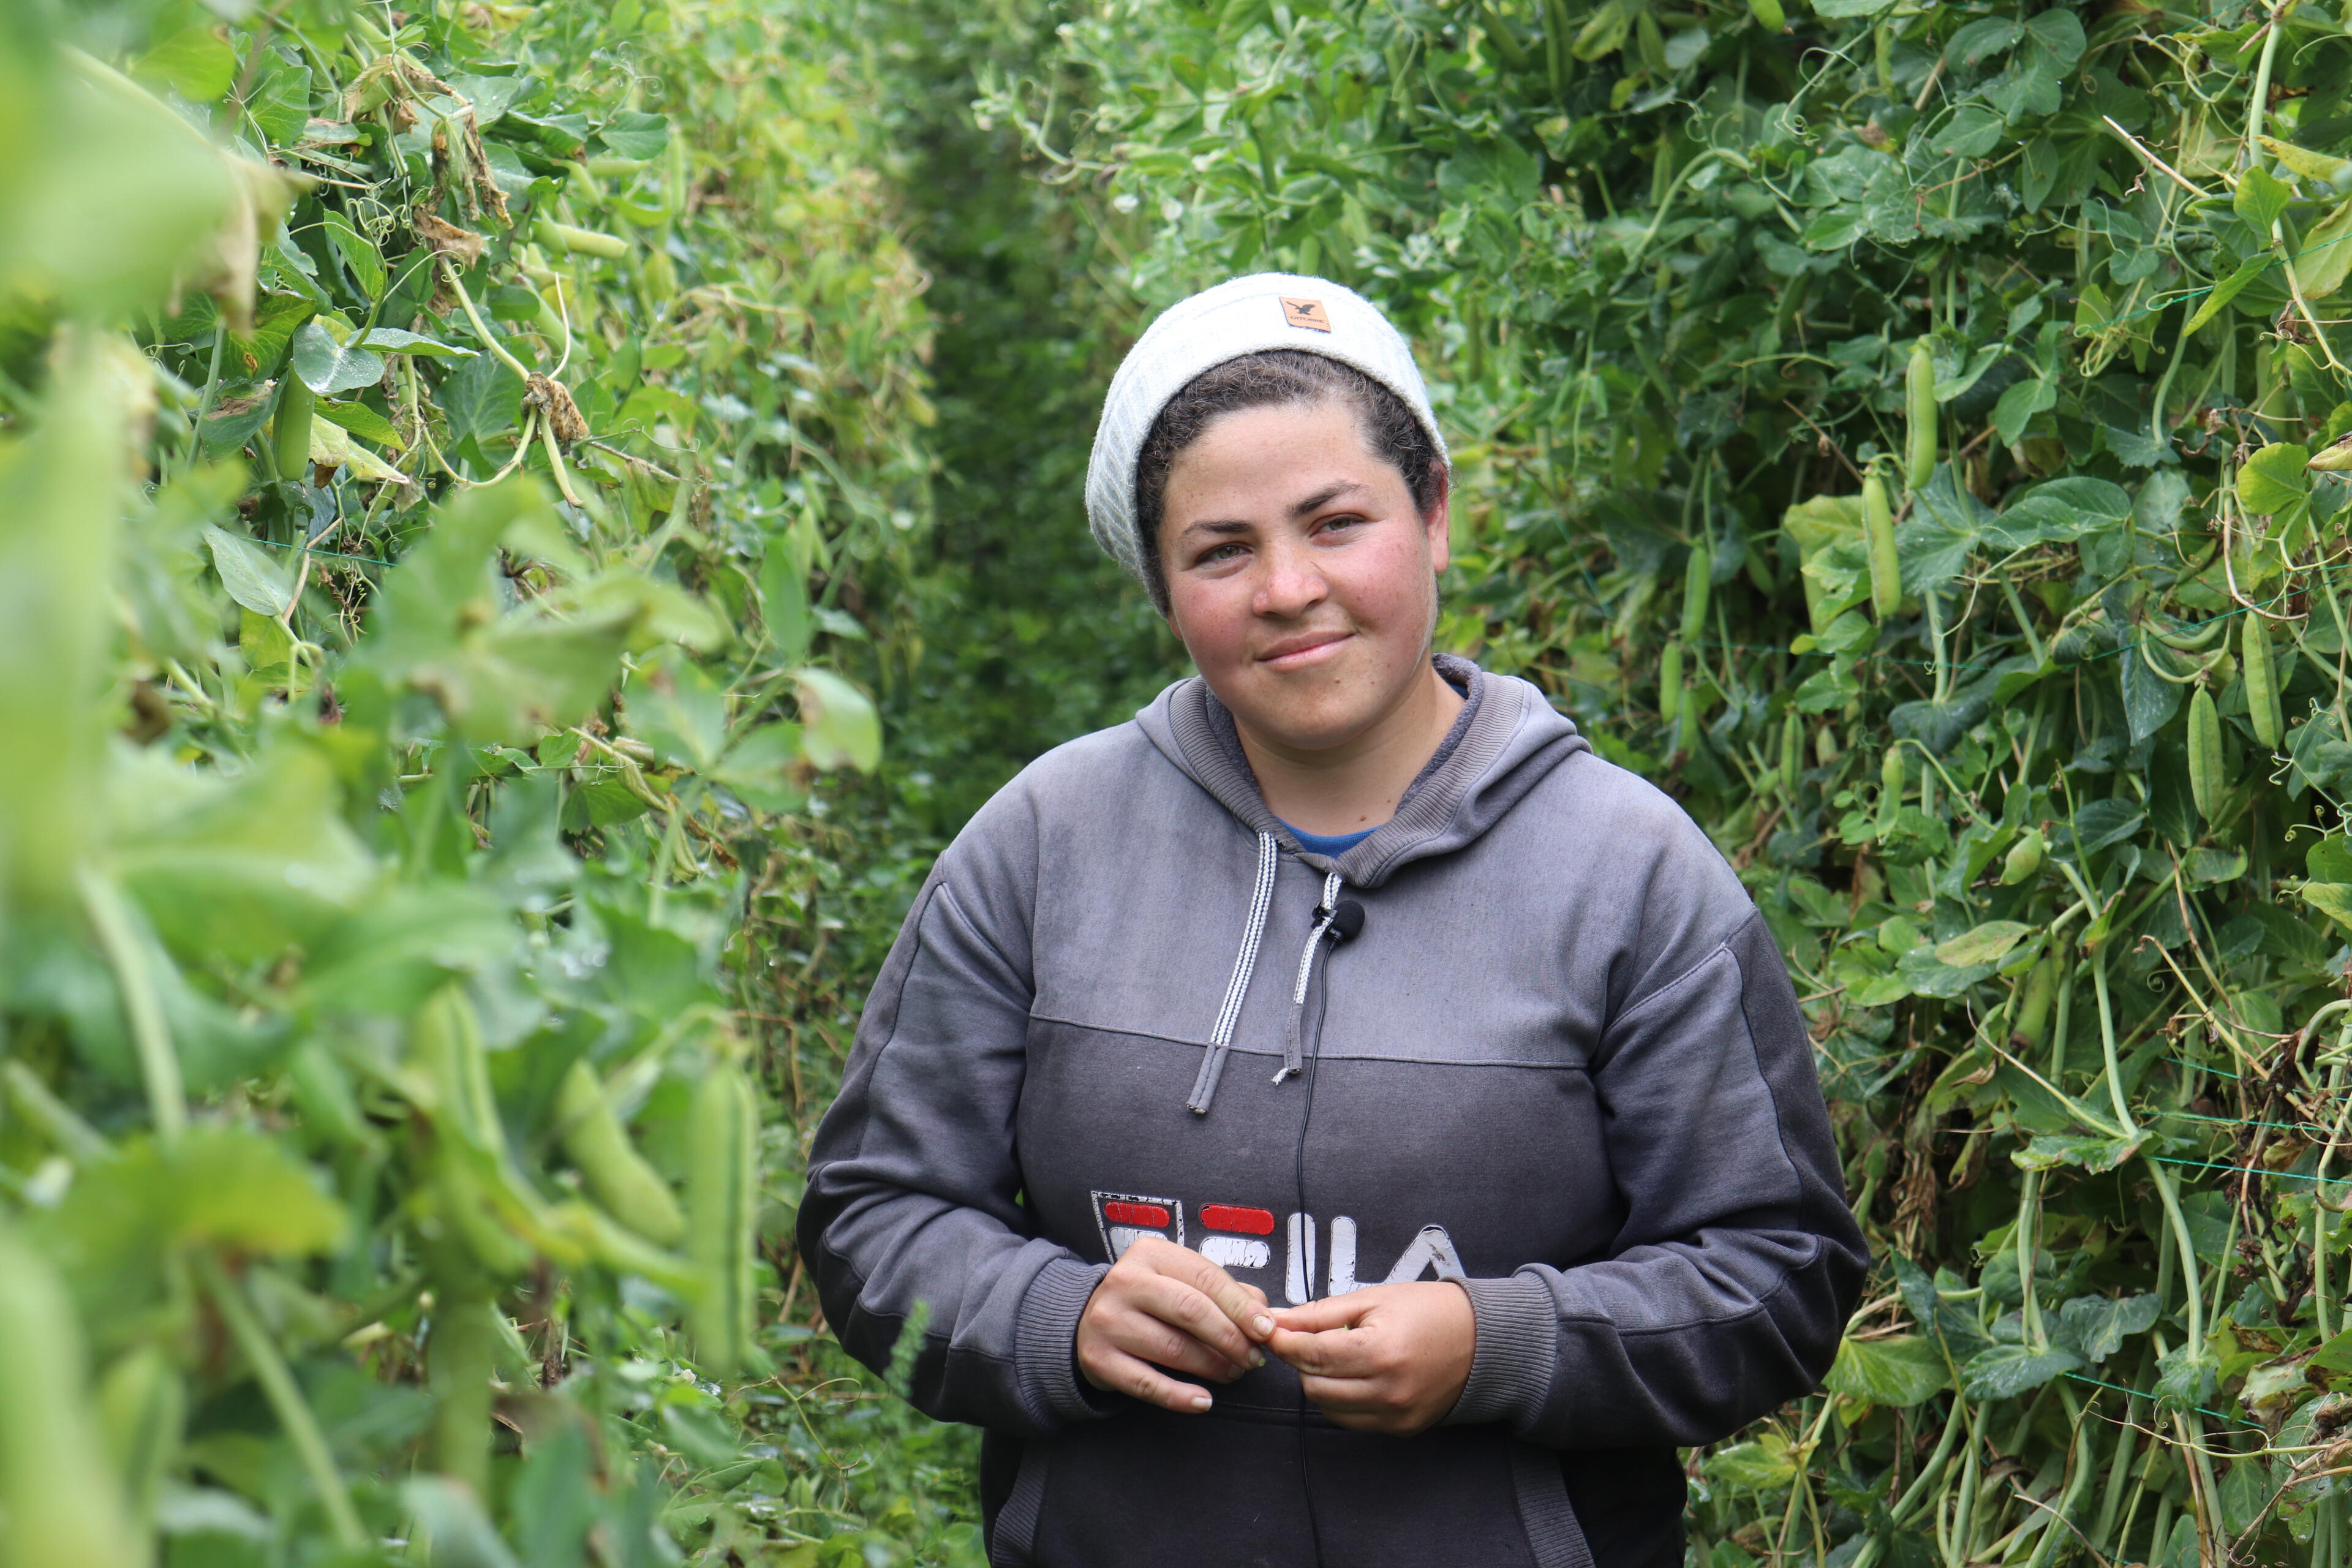 Nane, wearing a sweatshirt and cap, stands smiling among rows of peas growing on the farm where she works in Ecuador.